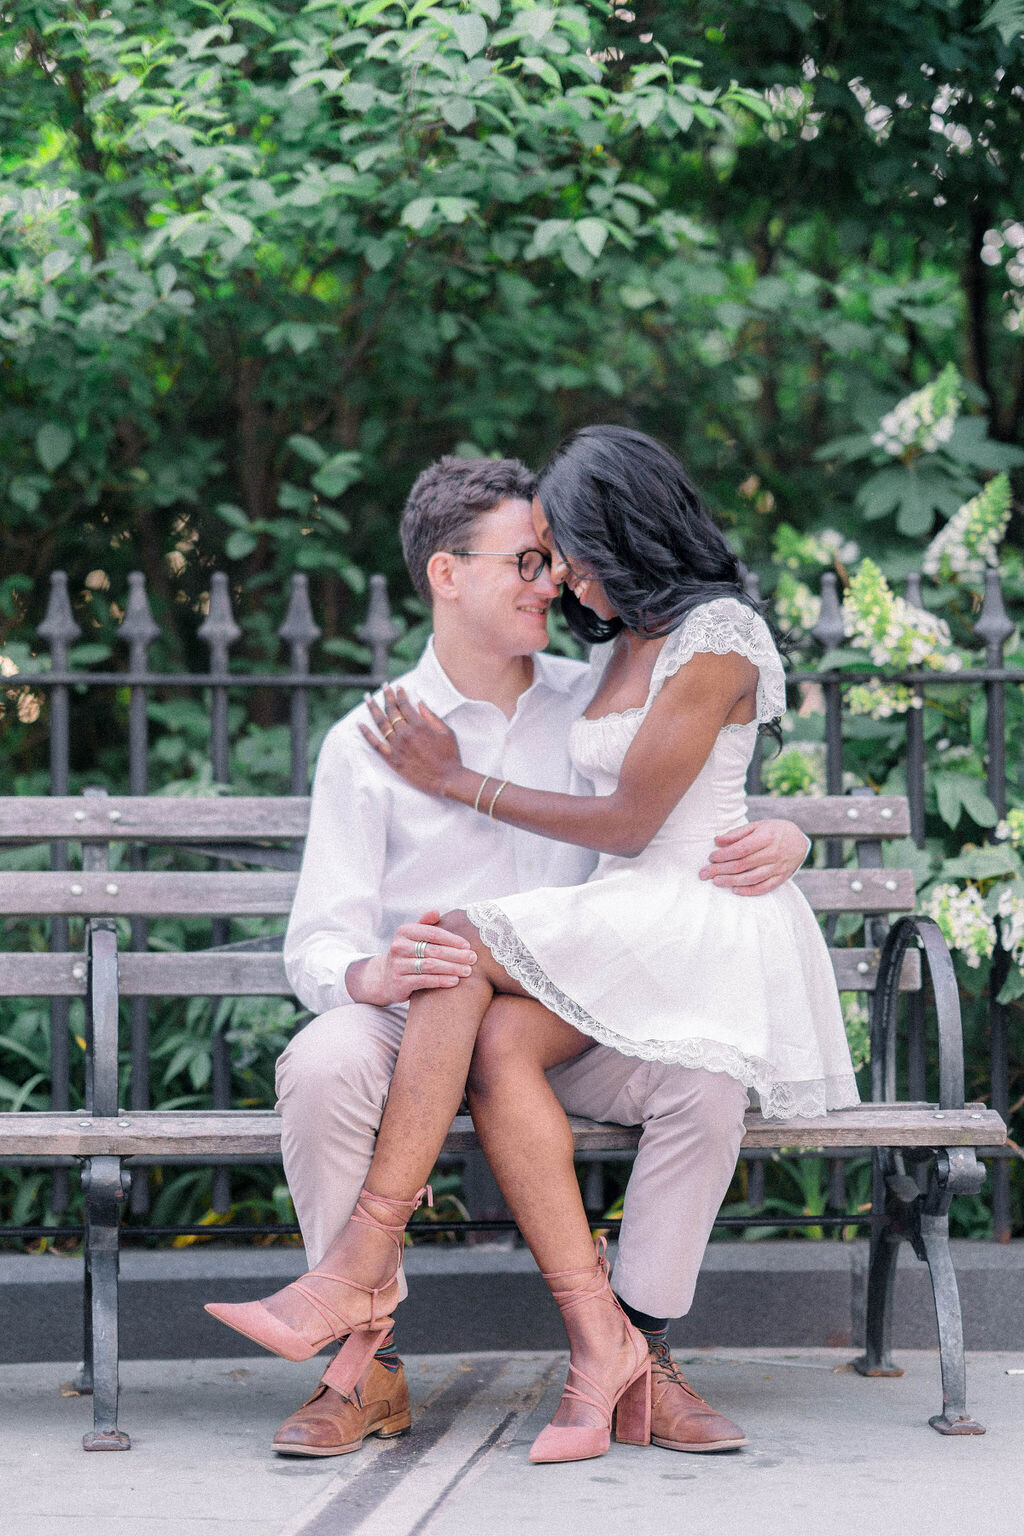 AllThingsJoyPhotography_TomMichelle_Engagement_HIGHRES-138